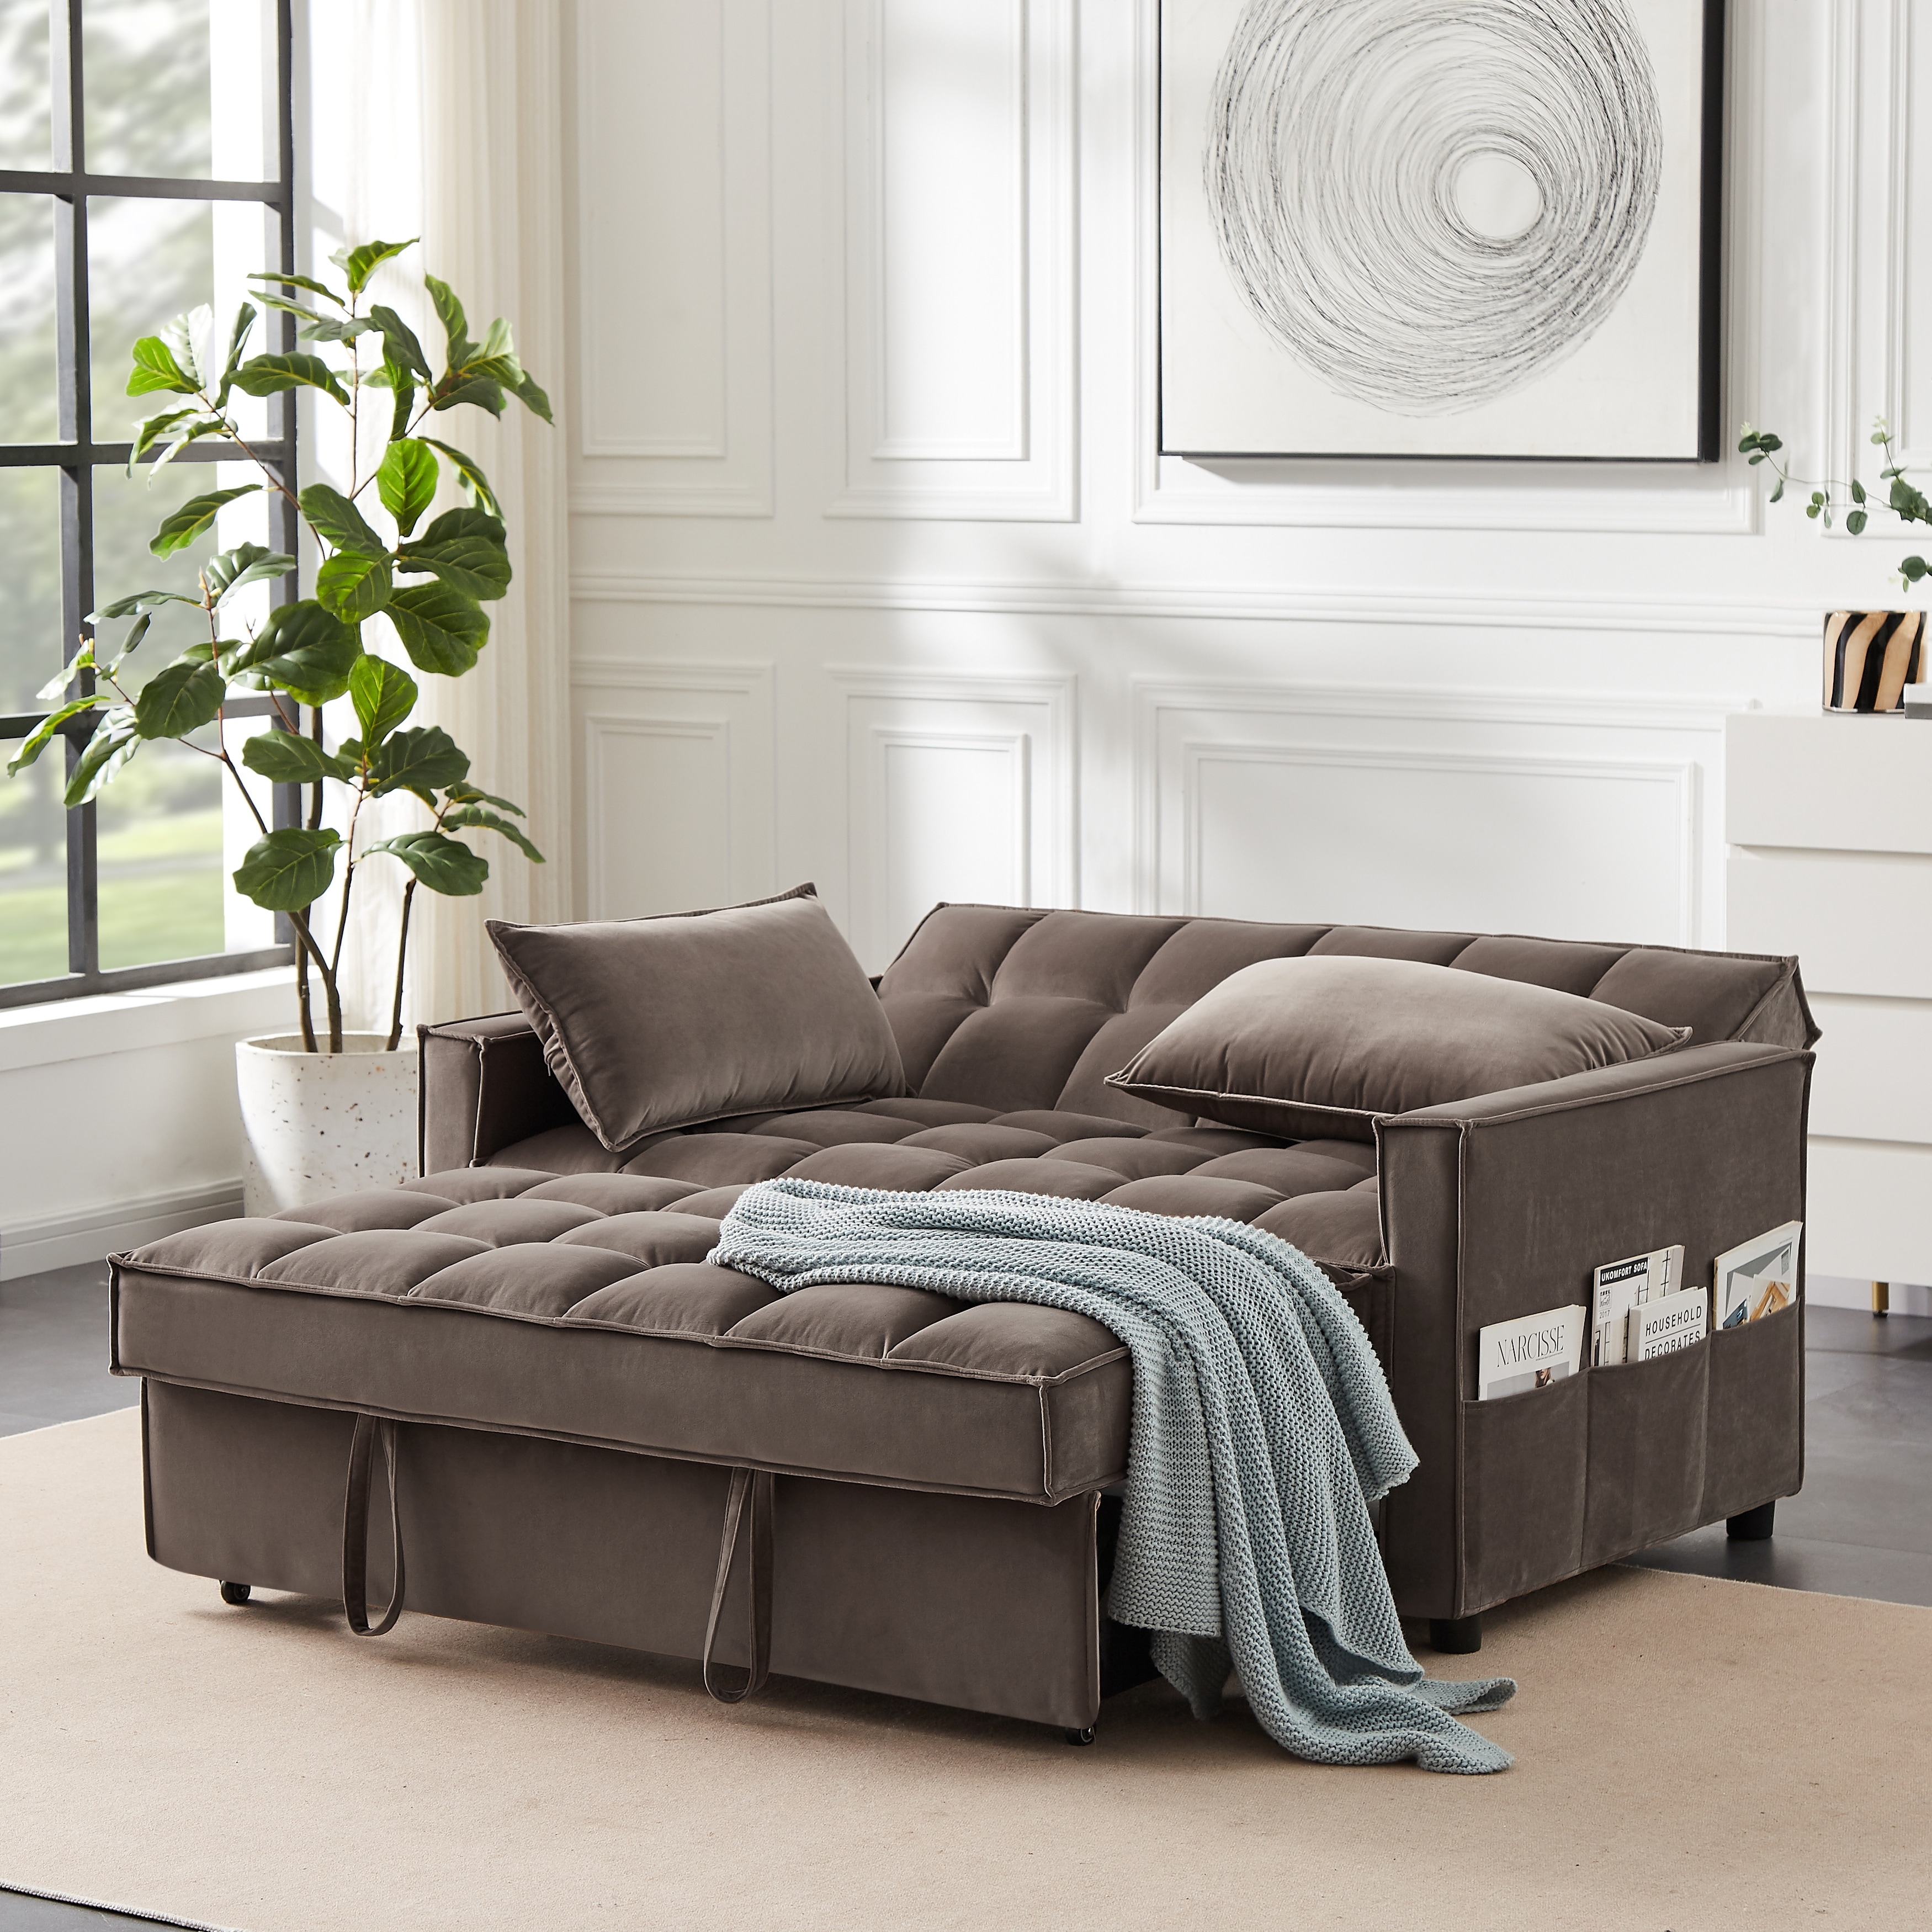 New design comfortable sofa with two throw pillows in the same color - Bed  Bath & Beyond - 36933863